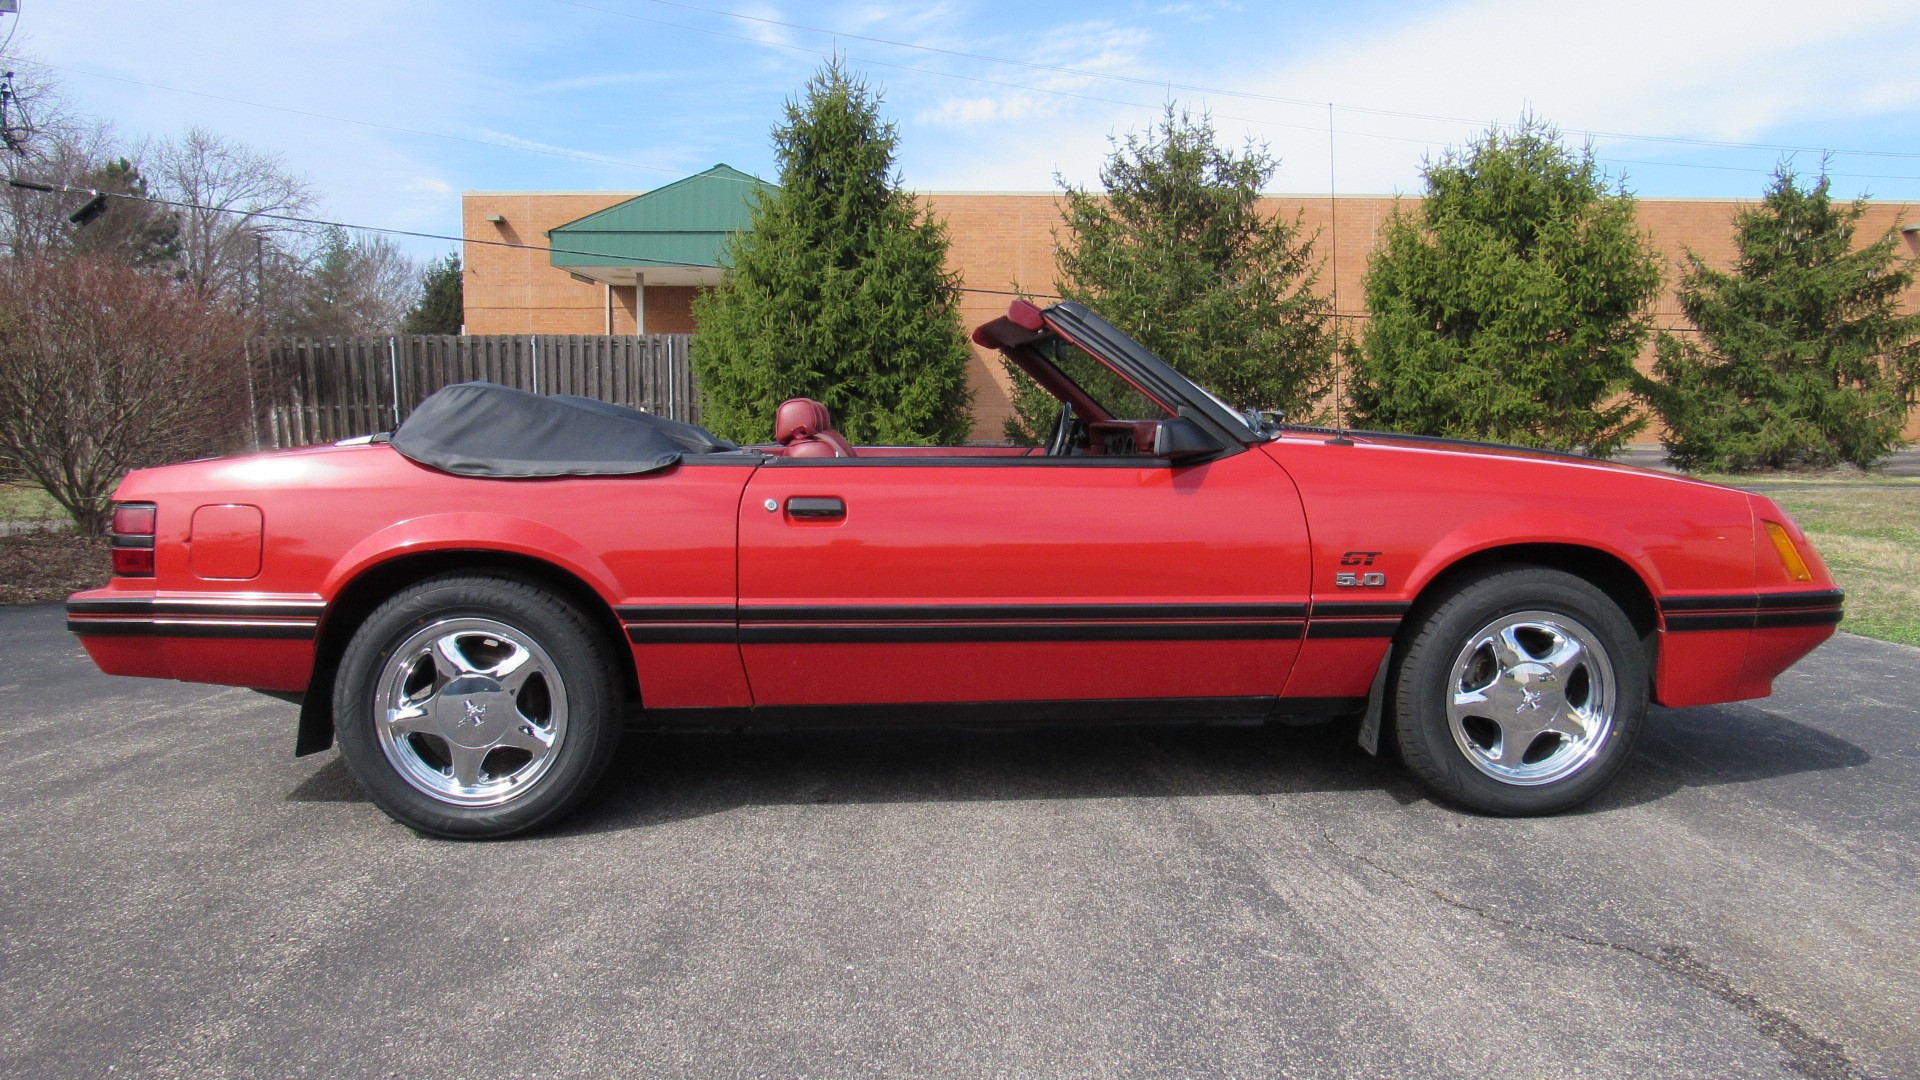 1984 Mustang GT, Convertible, Auto, 59K Miles, Sold!